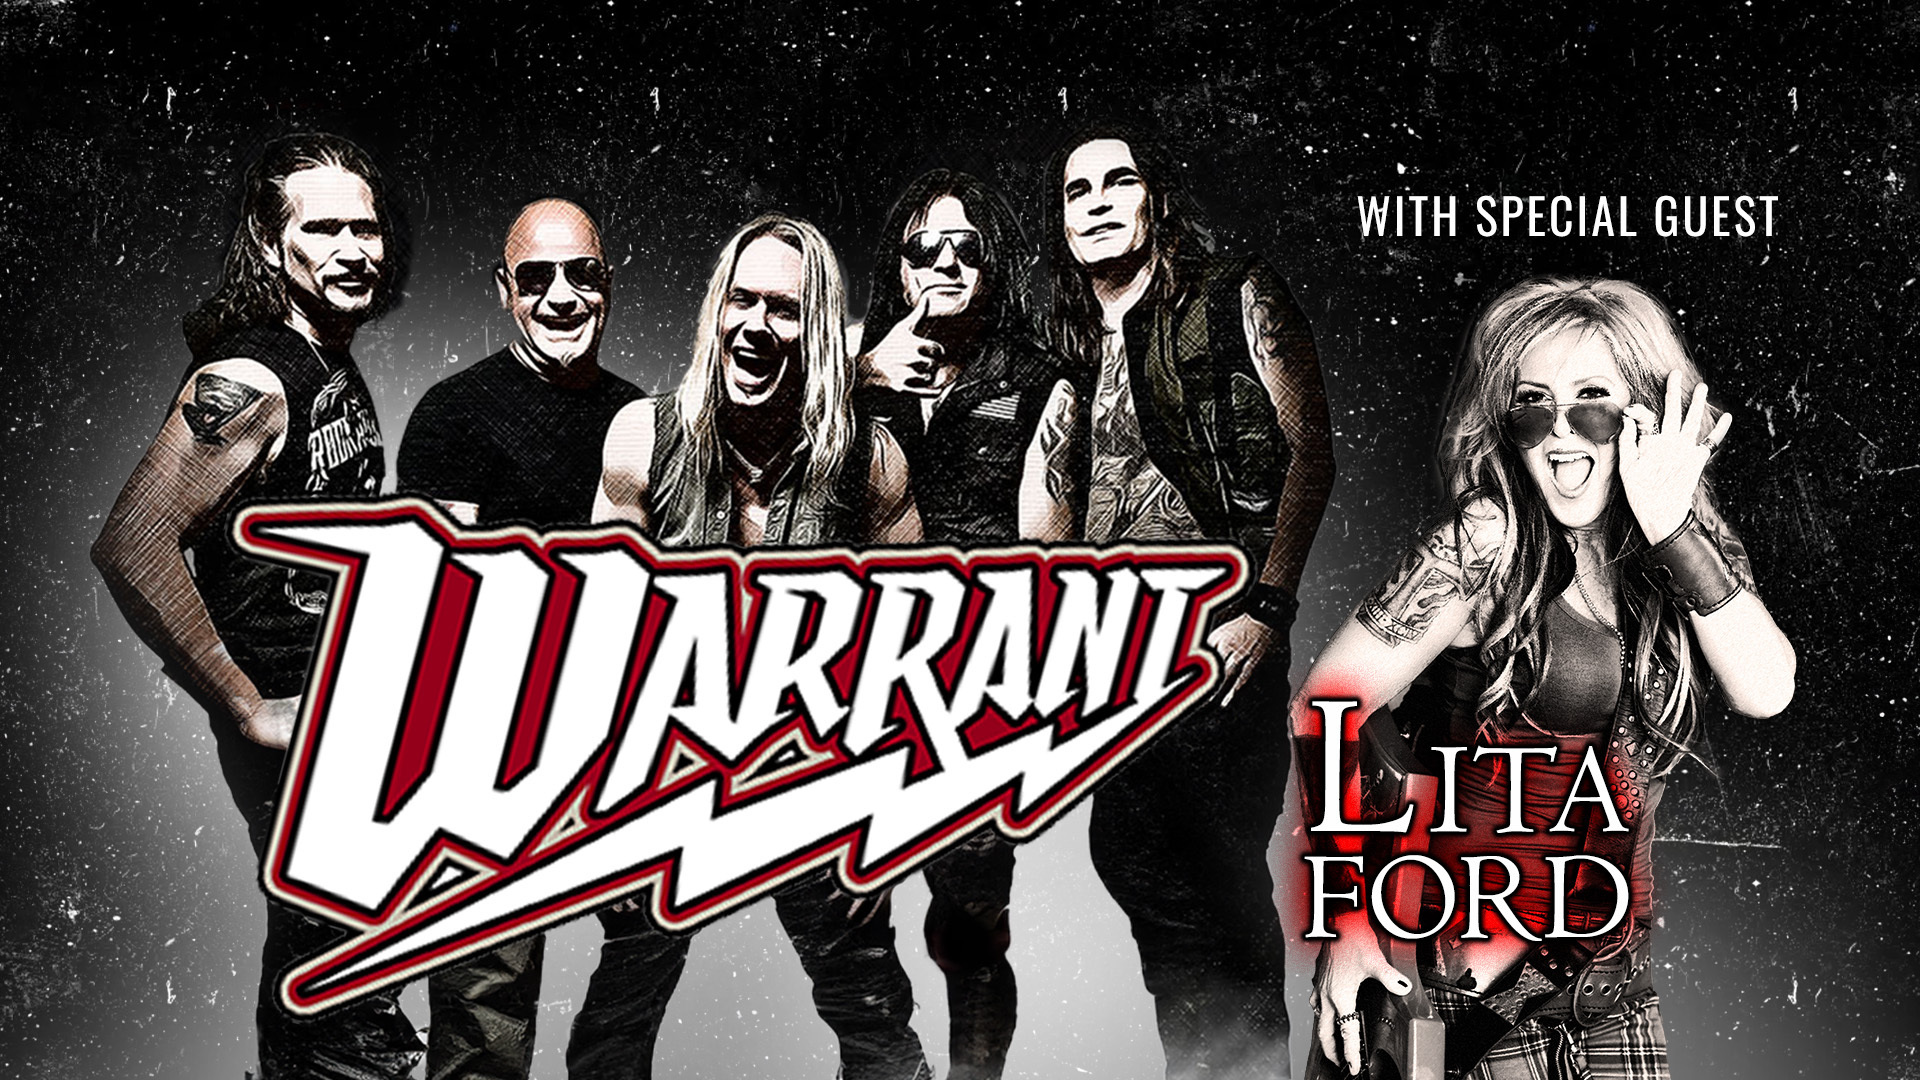 Warrant - Let the Good Times Rock Tour with Special Guest: Lita Ford, Tucson, Arizona, United States